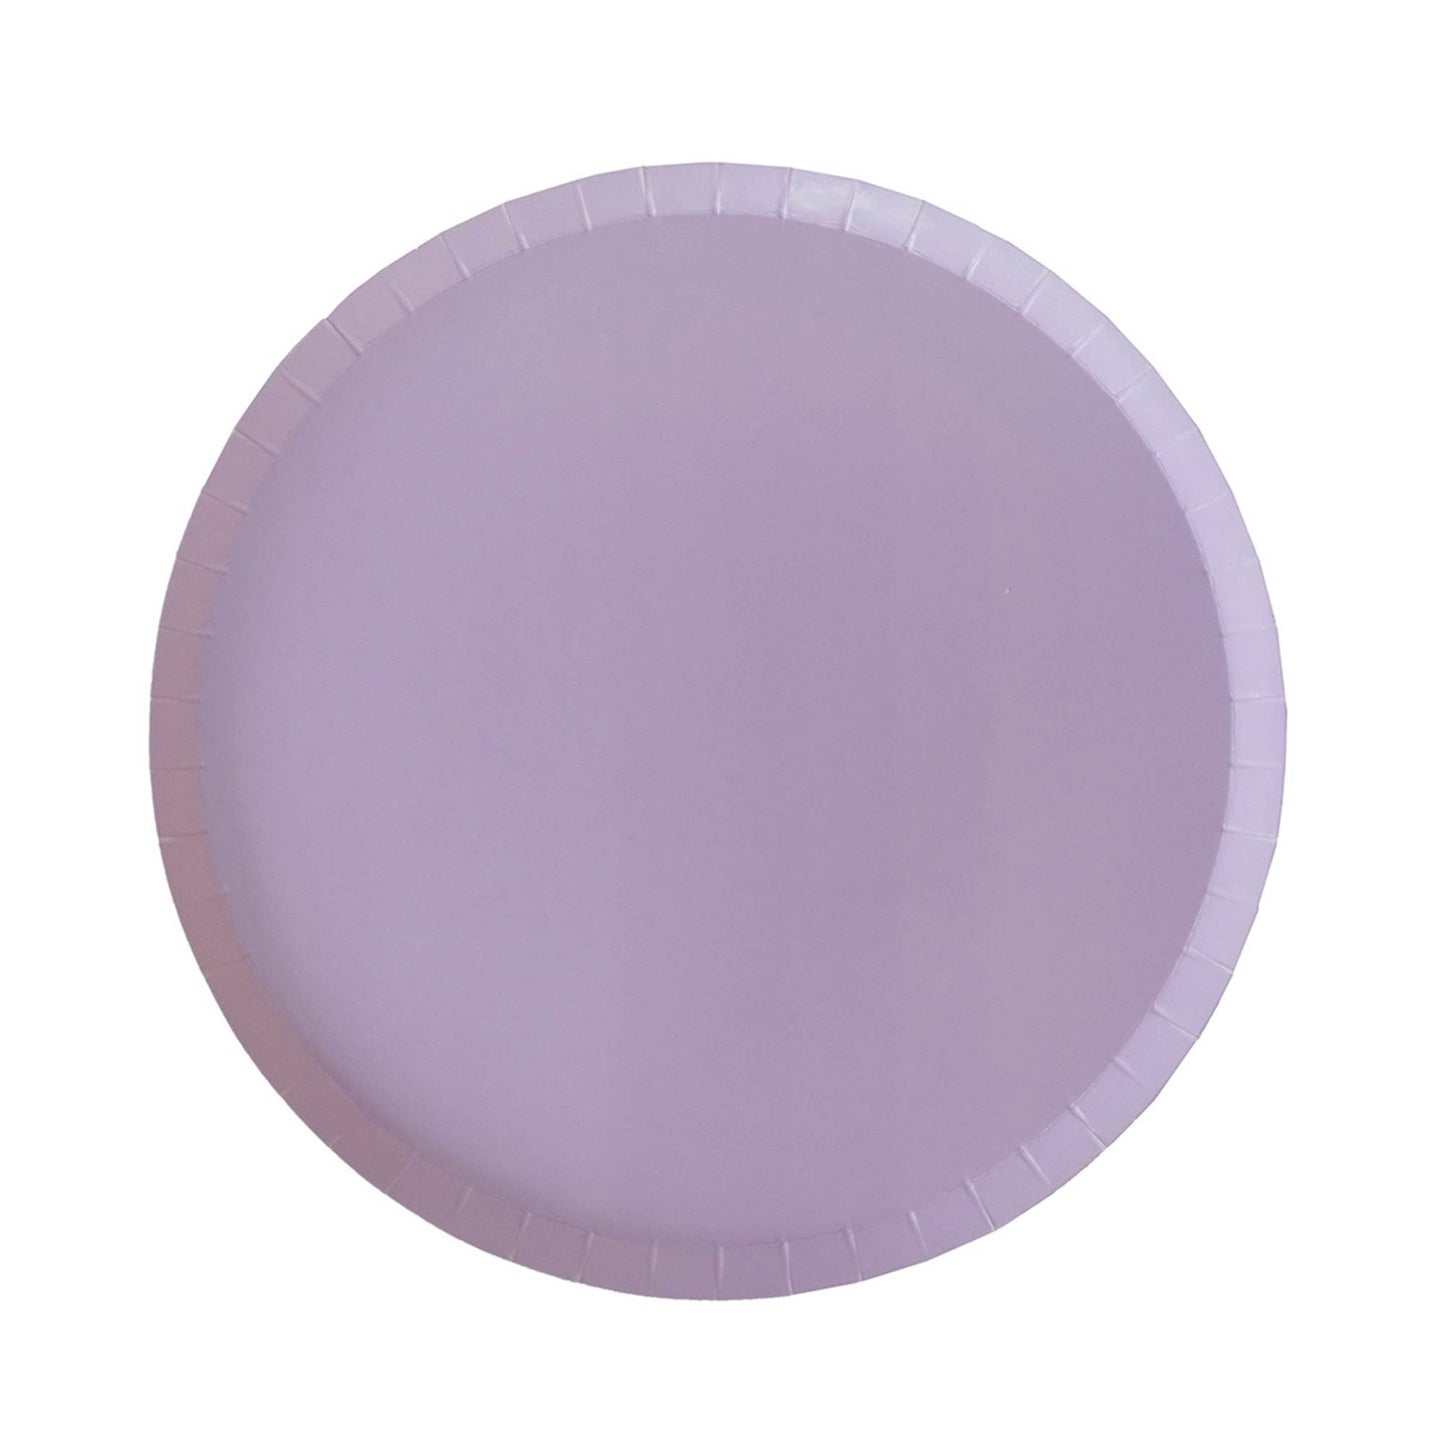 Shades Collection Lavender Dinner Plates